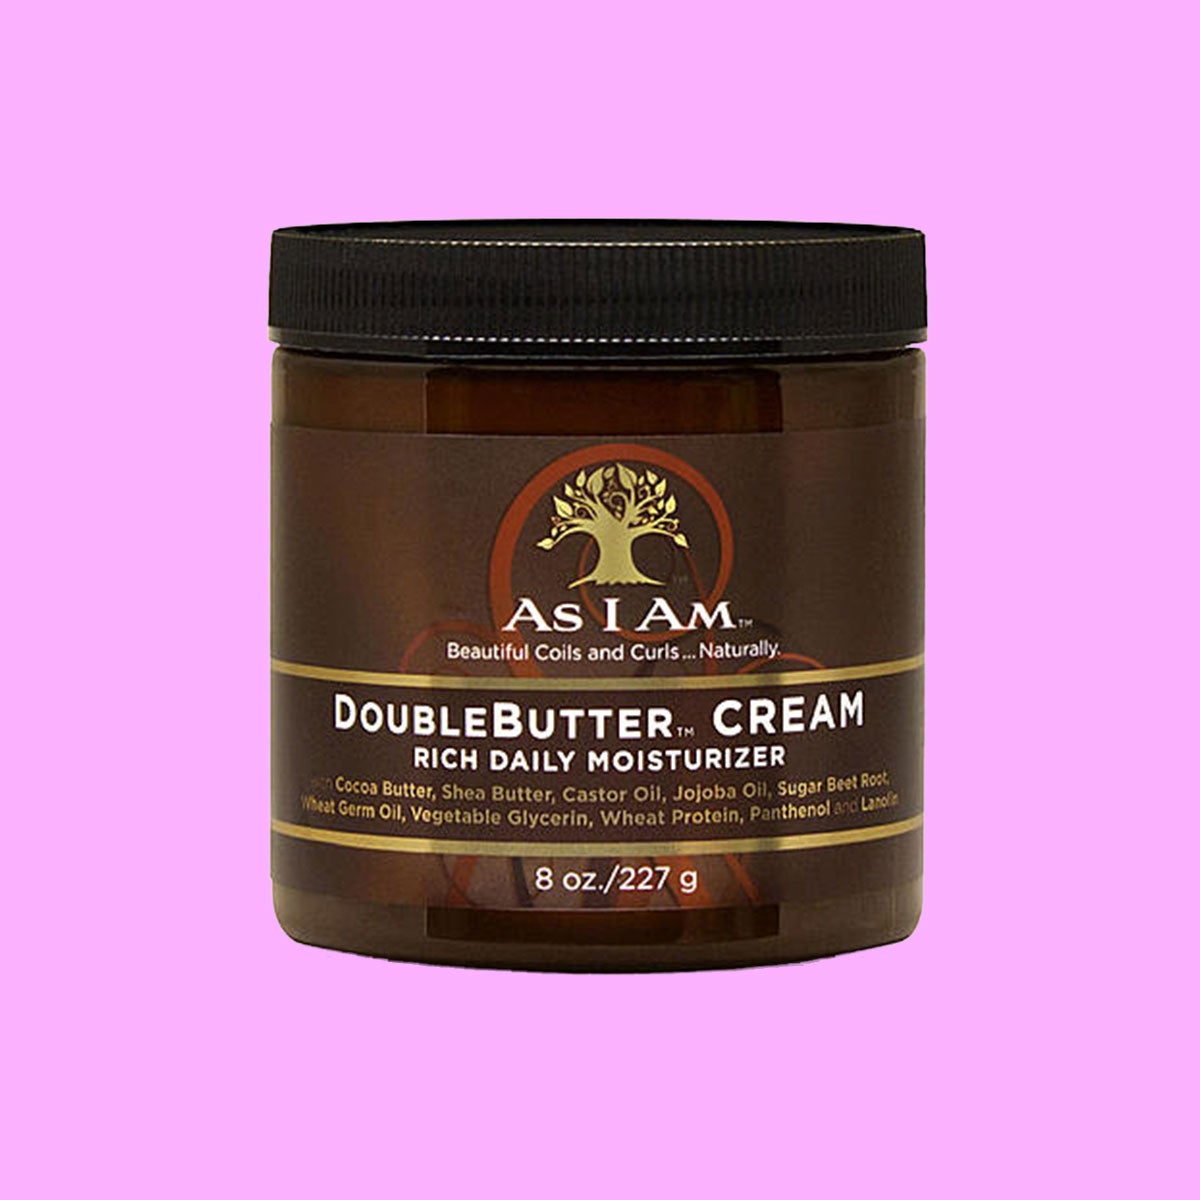 Time To Stock Up: These Moisturizers and Oils Will Save Your Hair From Frizz